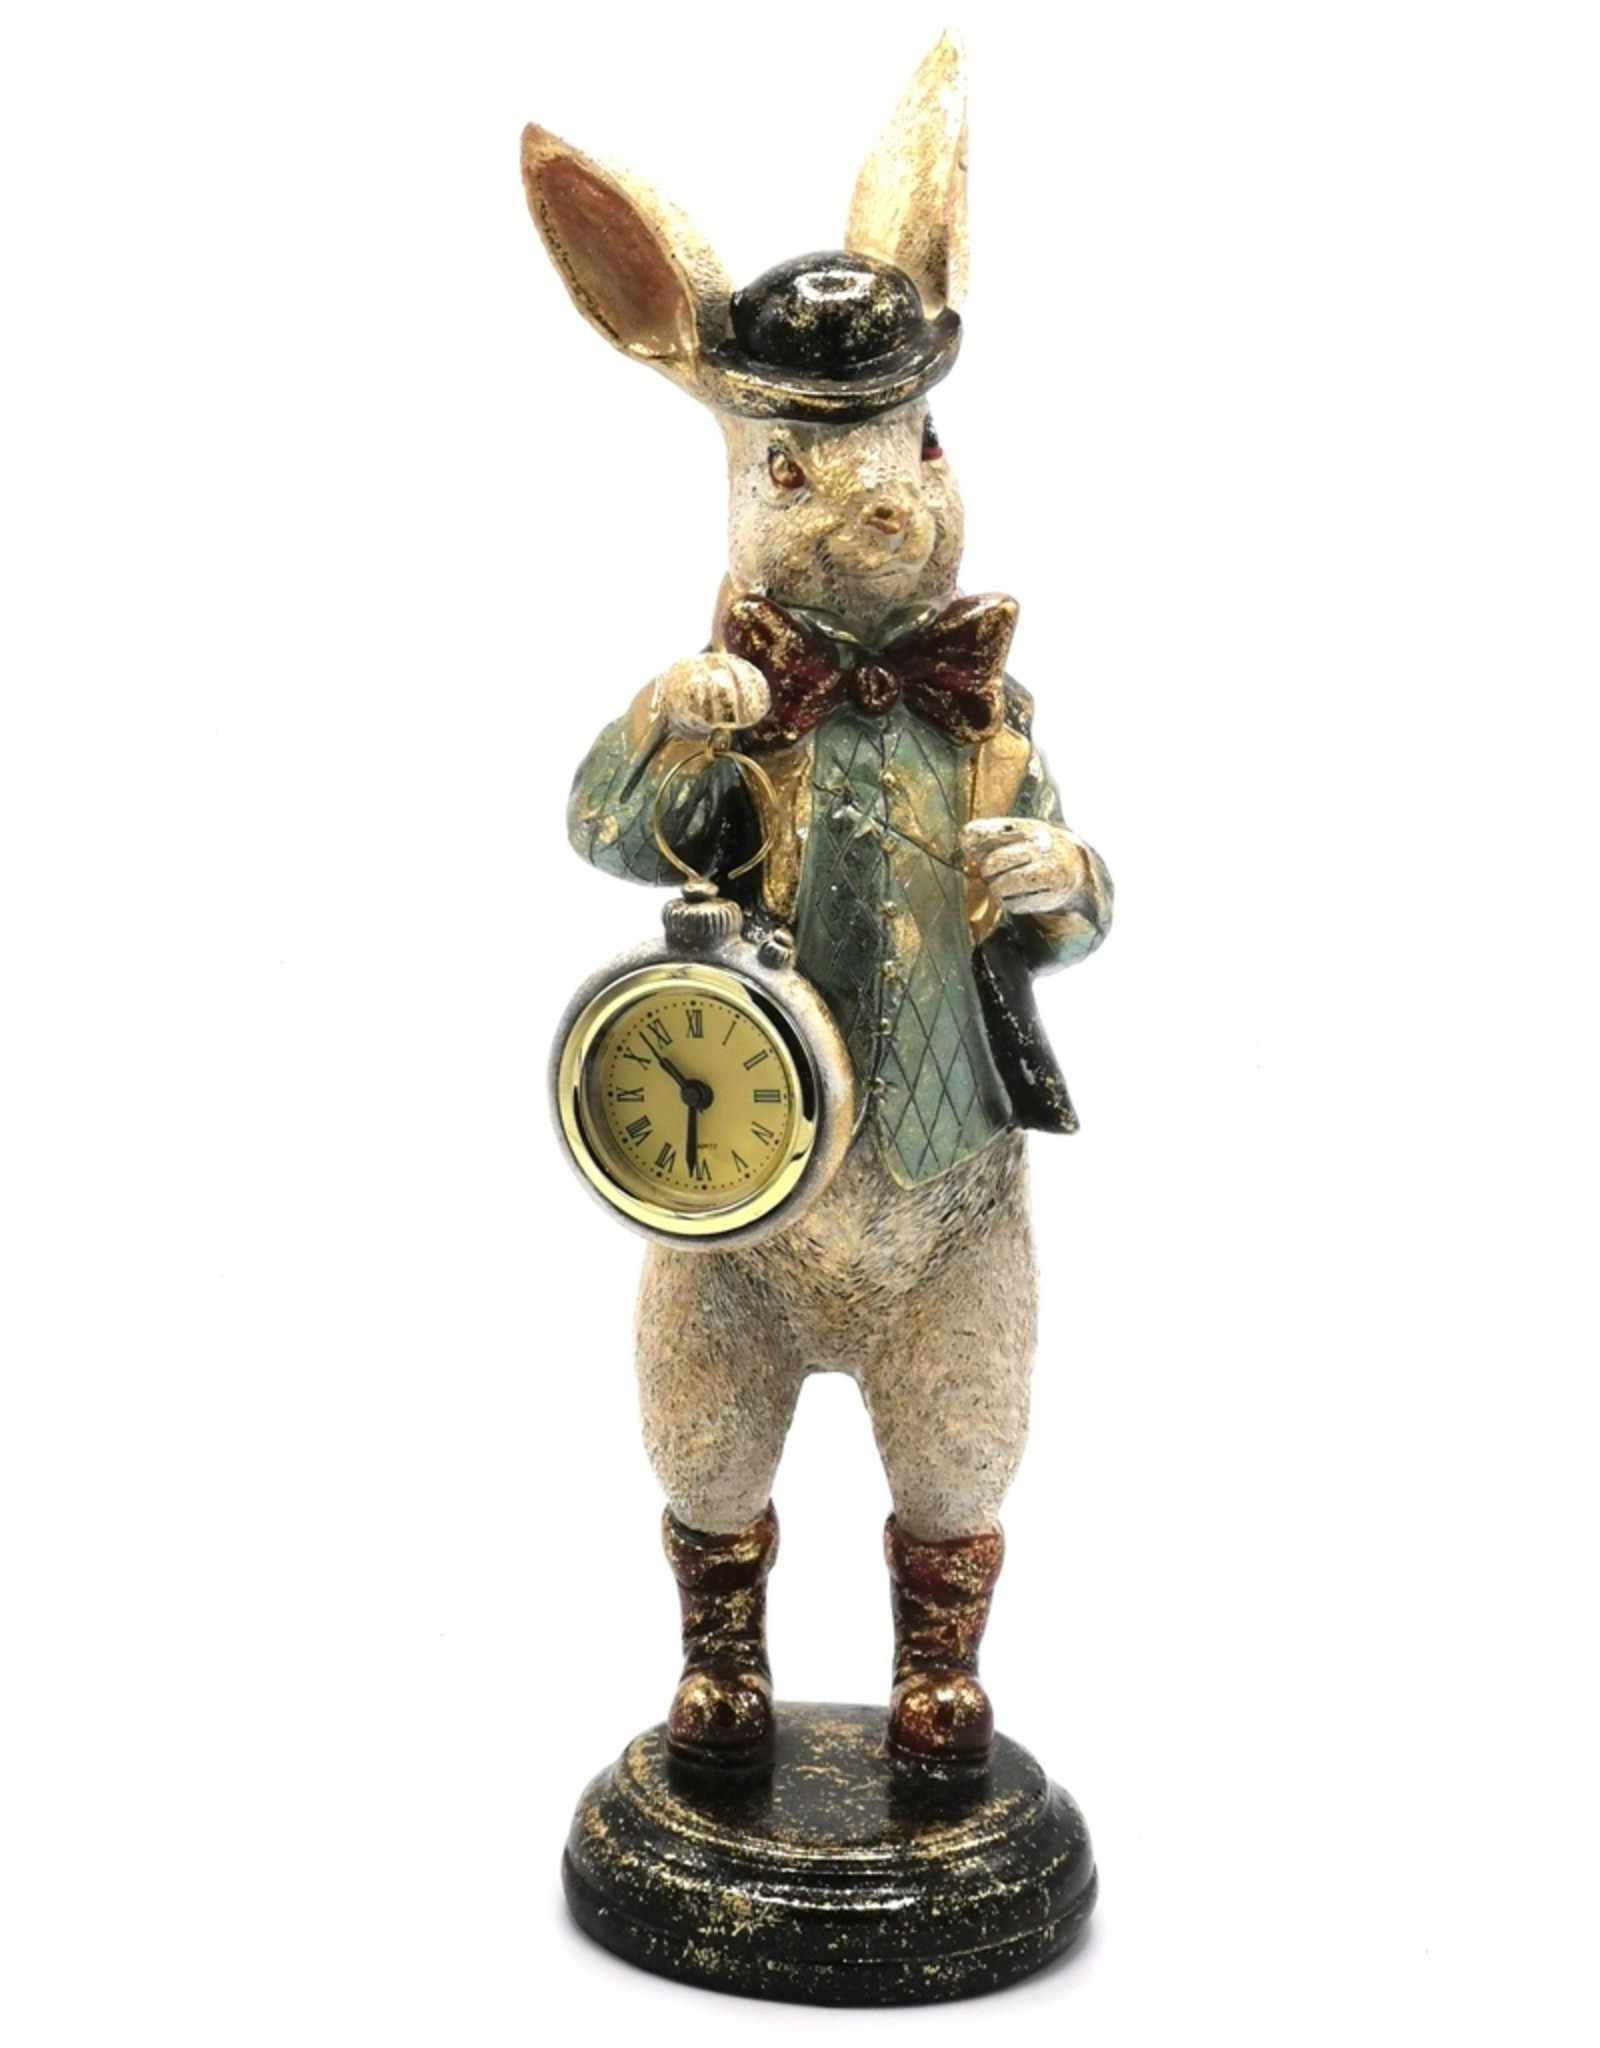 Trukado Giftware & Lifestyle - Rabbit in jacket and bowler hat with real clock  32cm